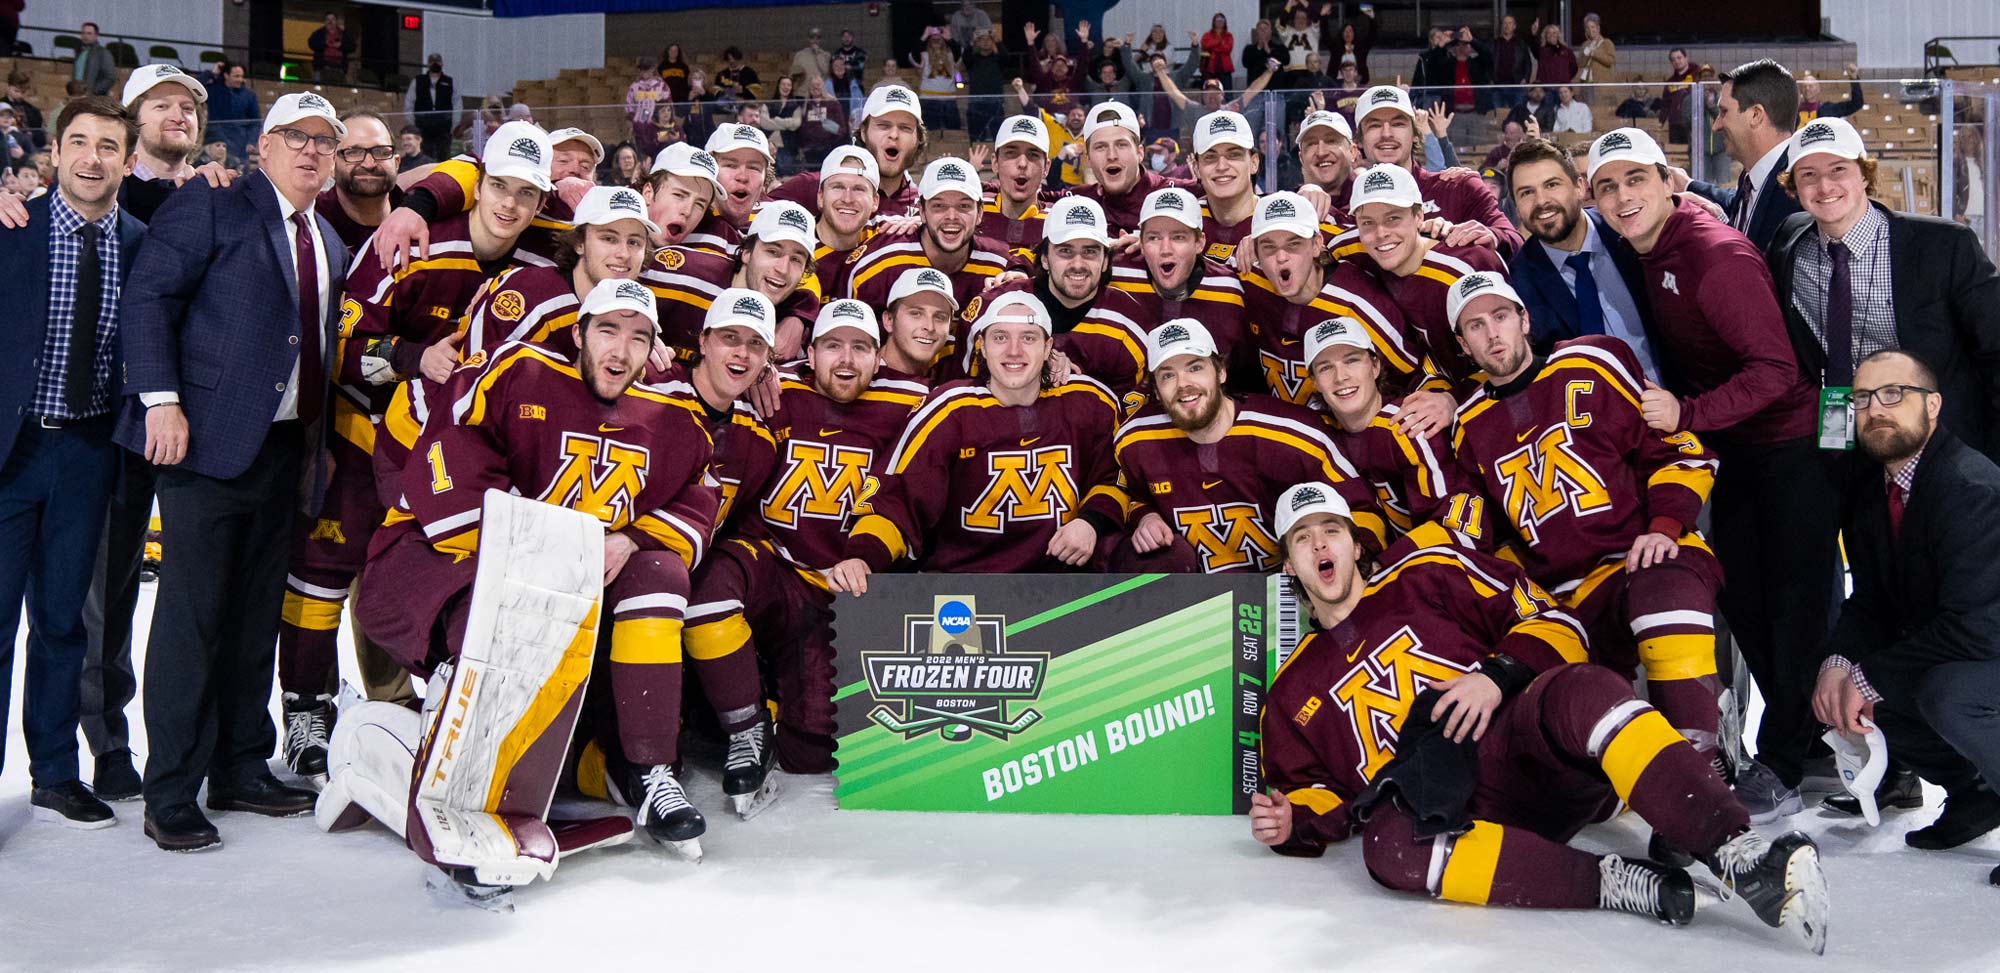 BostonBound! Gophers Win, Advance to Frozen Four Gopher Puck Live